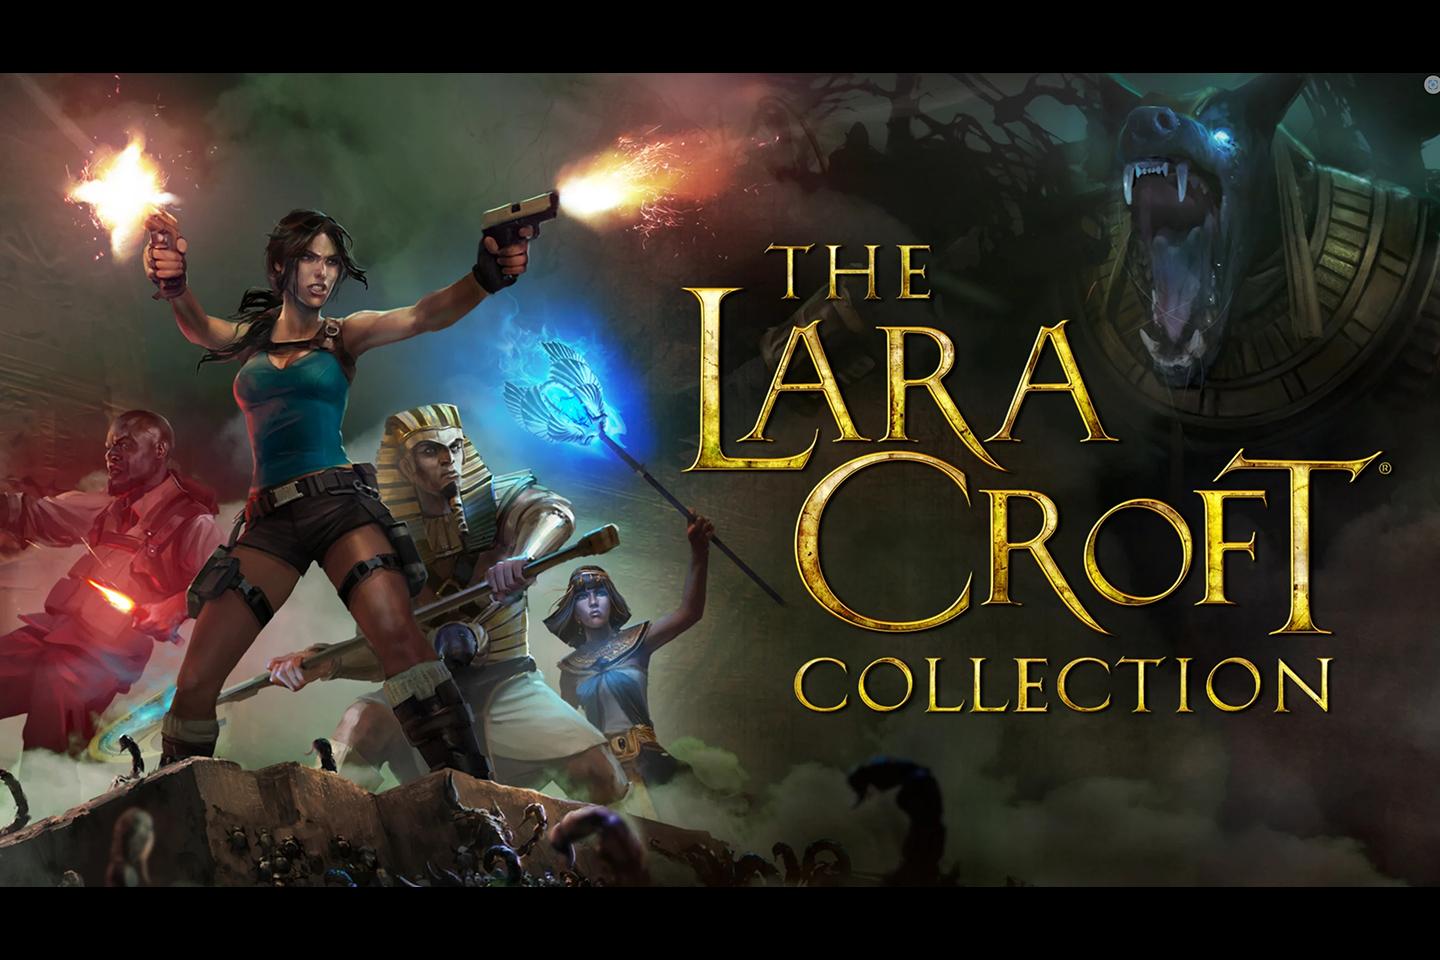 Promotional artwork for The Lara Croft Collection featuring the iconic character with dual pistols, alongside other characters and creatures, against a backdrop of ancient ruins and mystical elements.